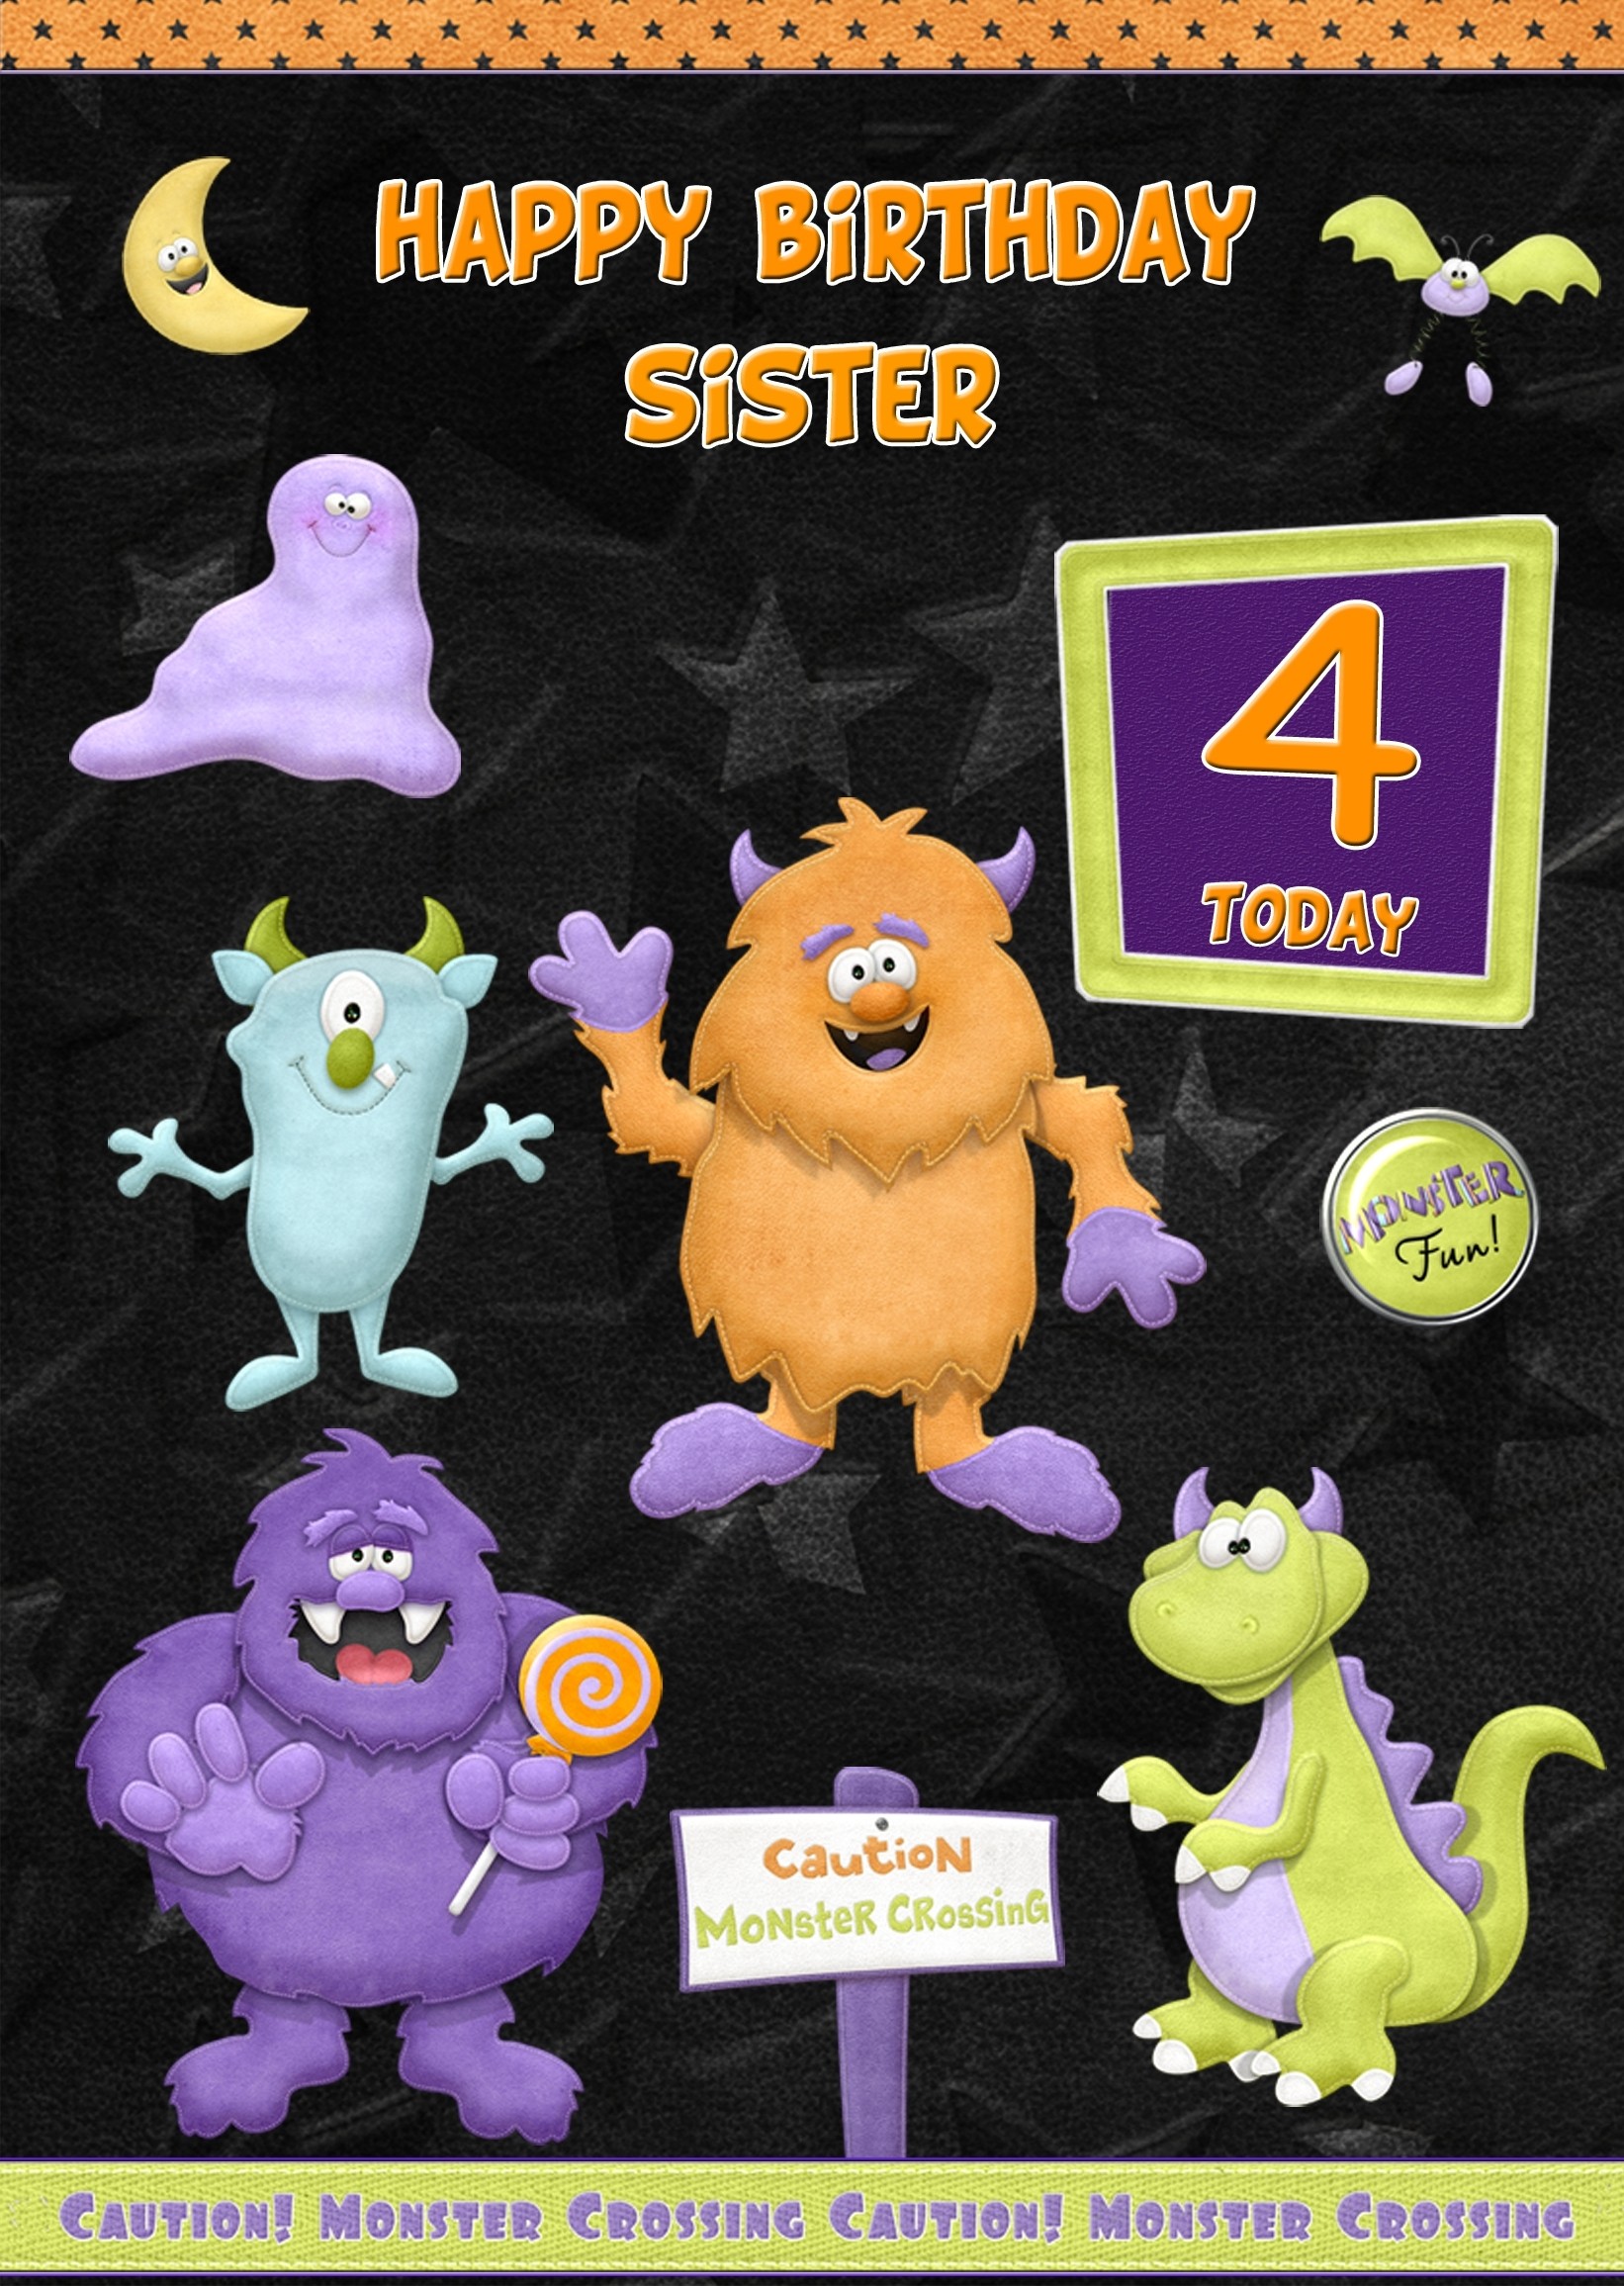 Kids 4th Birthday Funny Monster Cartoon Card for Sister